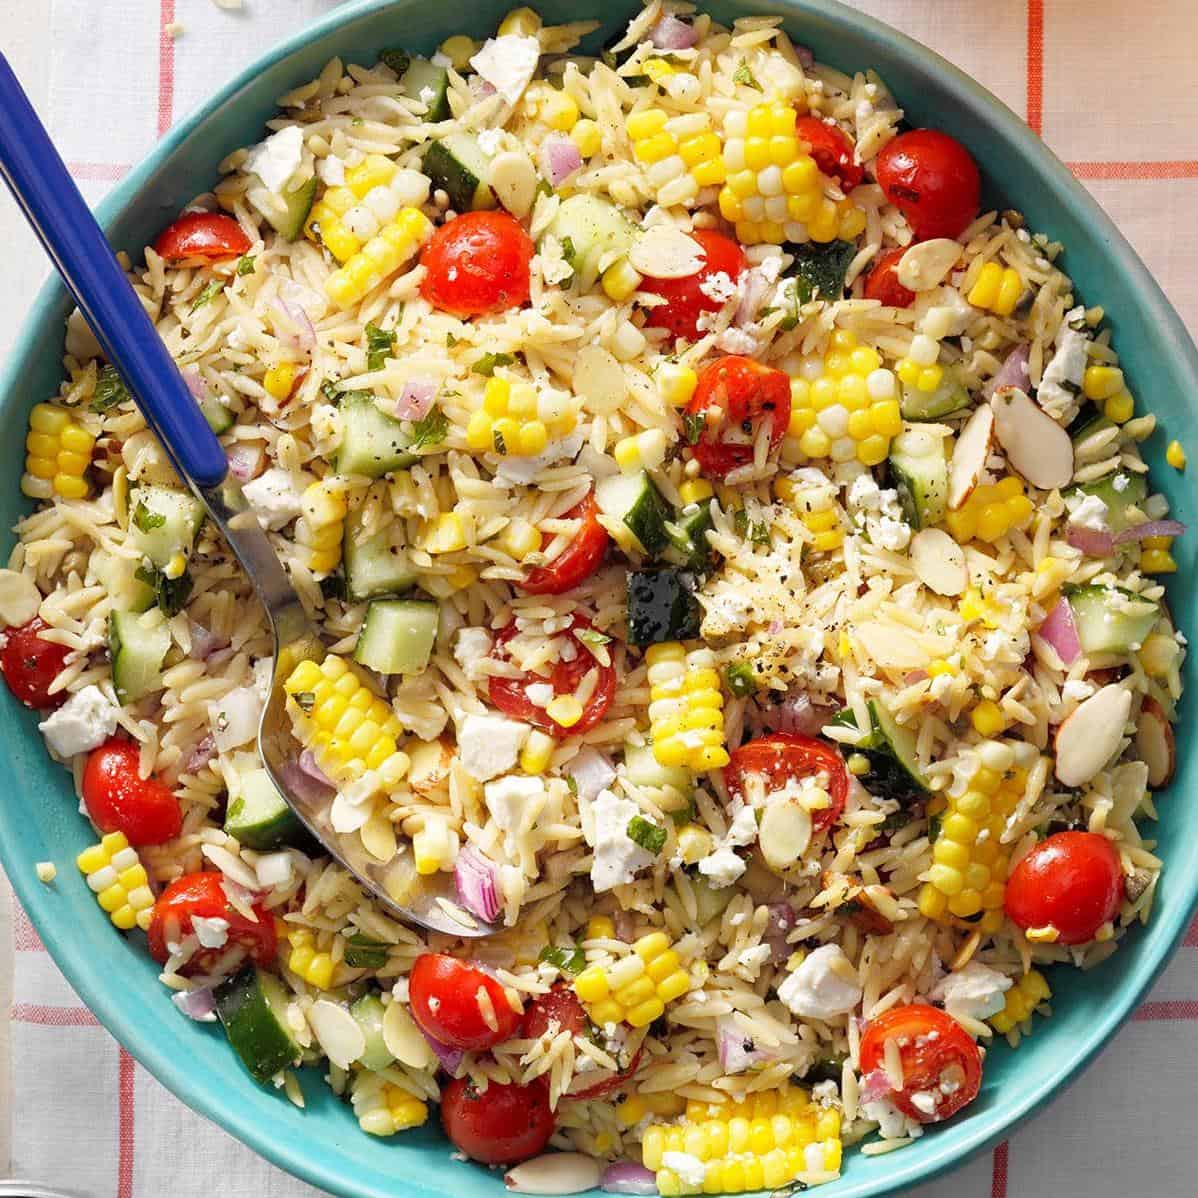  This salad is the perfect way to celebrate everything summer has to offer.